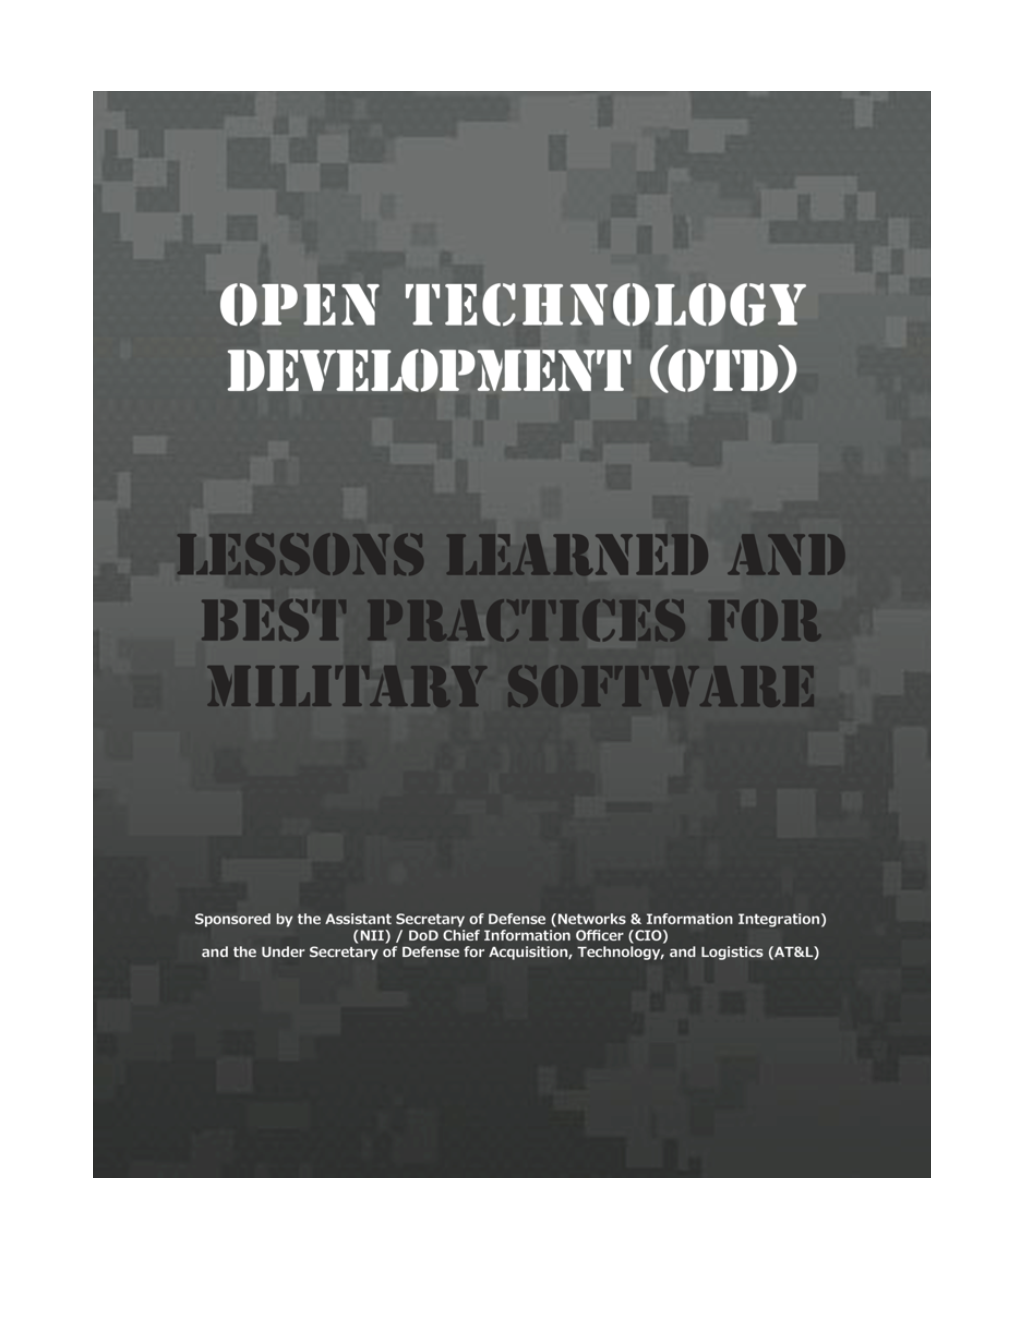 Open Technology Development (OTD): Lessons Learned & Best Practices for Military Software